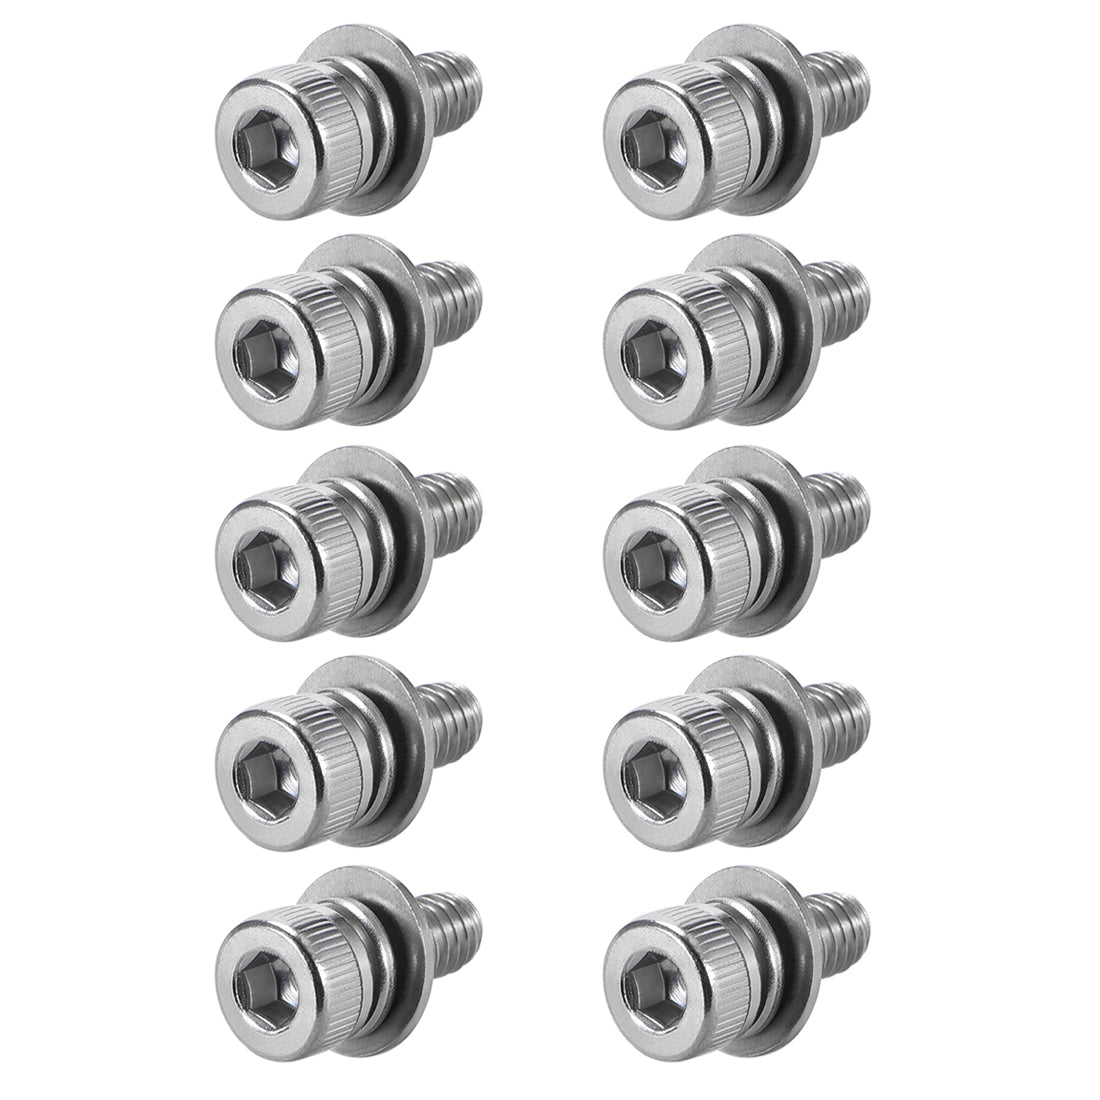 Uxcell Uxcell M4 x 12mm Stainless Steel Hex Socket Head Cap Screws Bolts Combine with Spring Washer and Plain Washers 10pcs